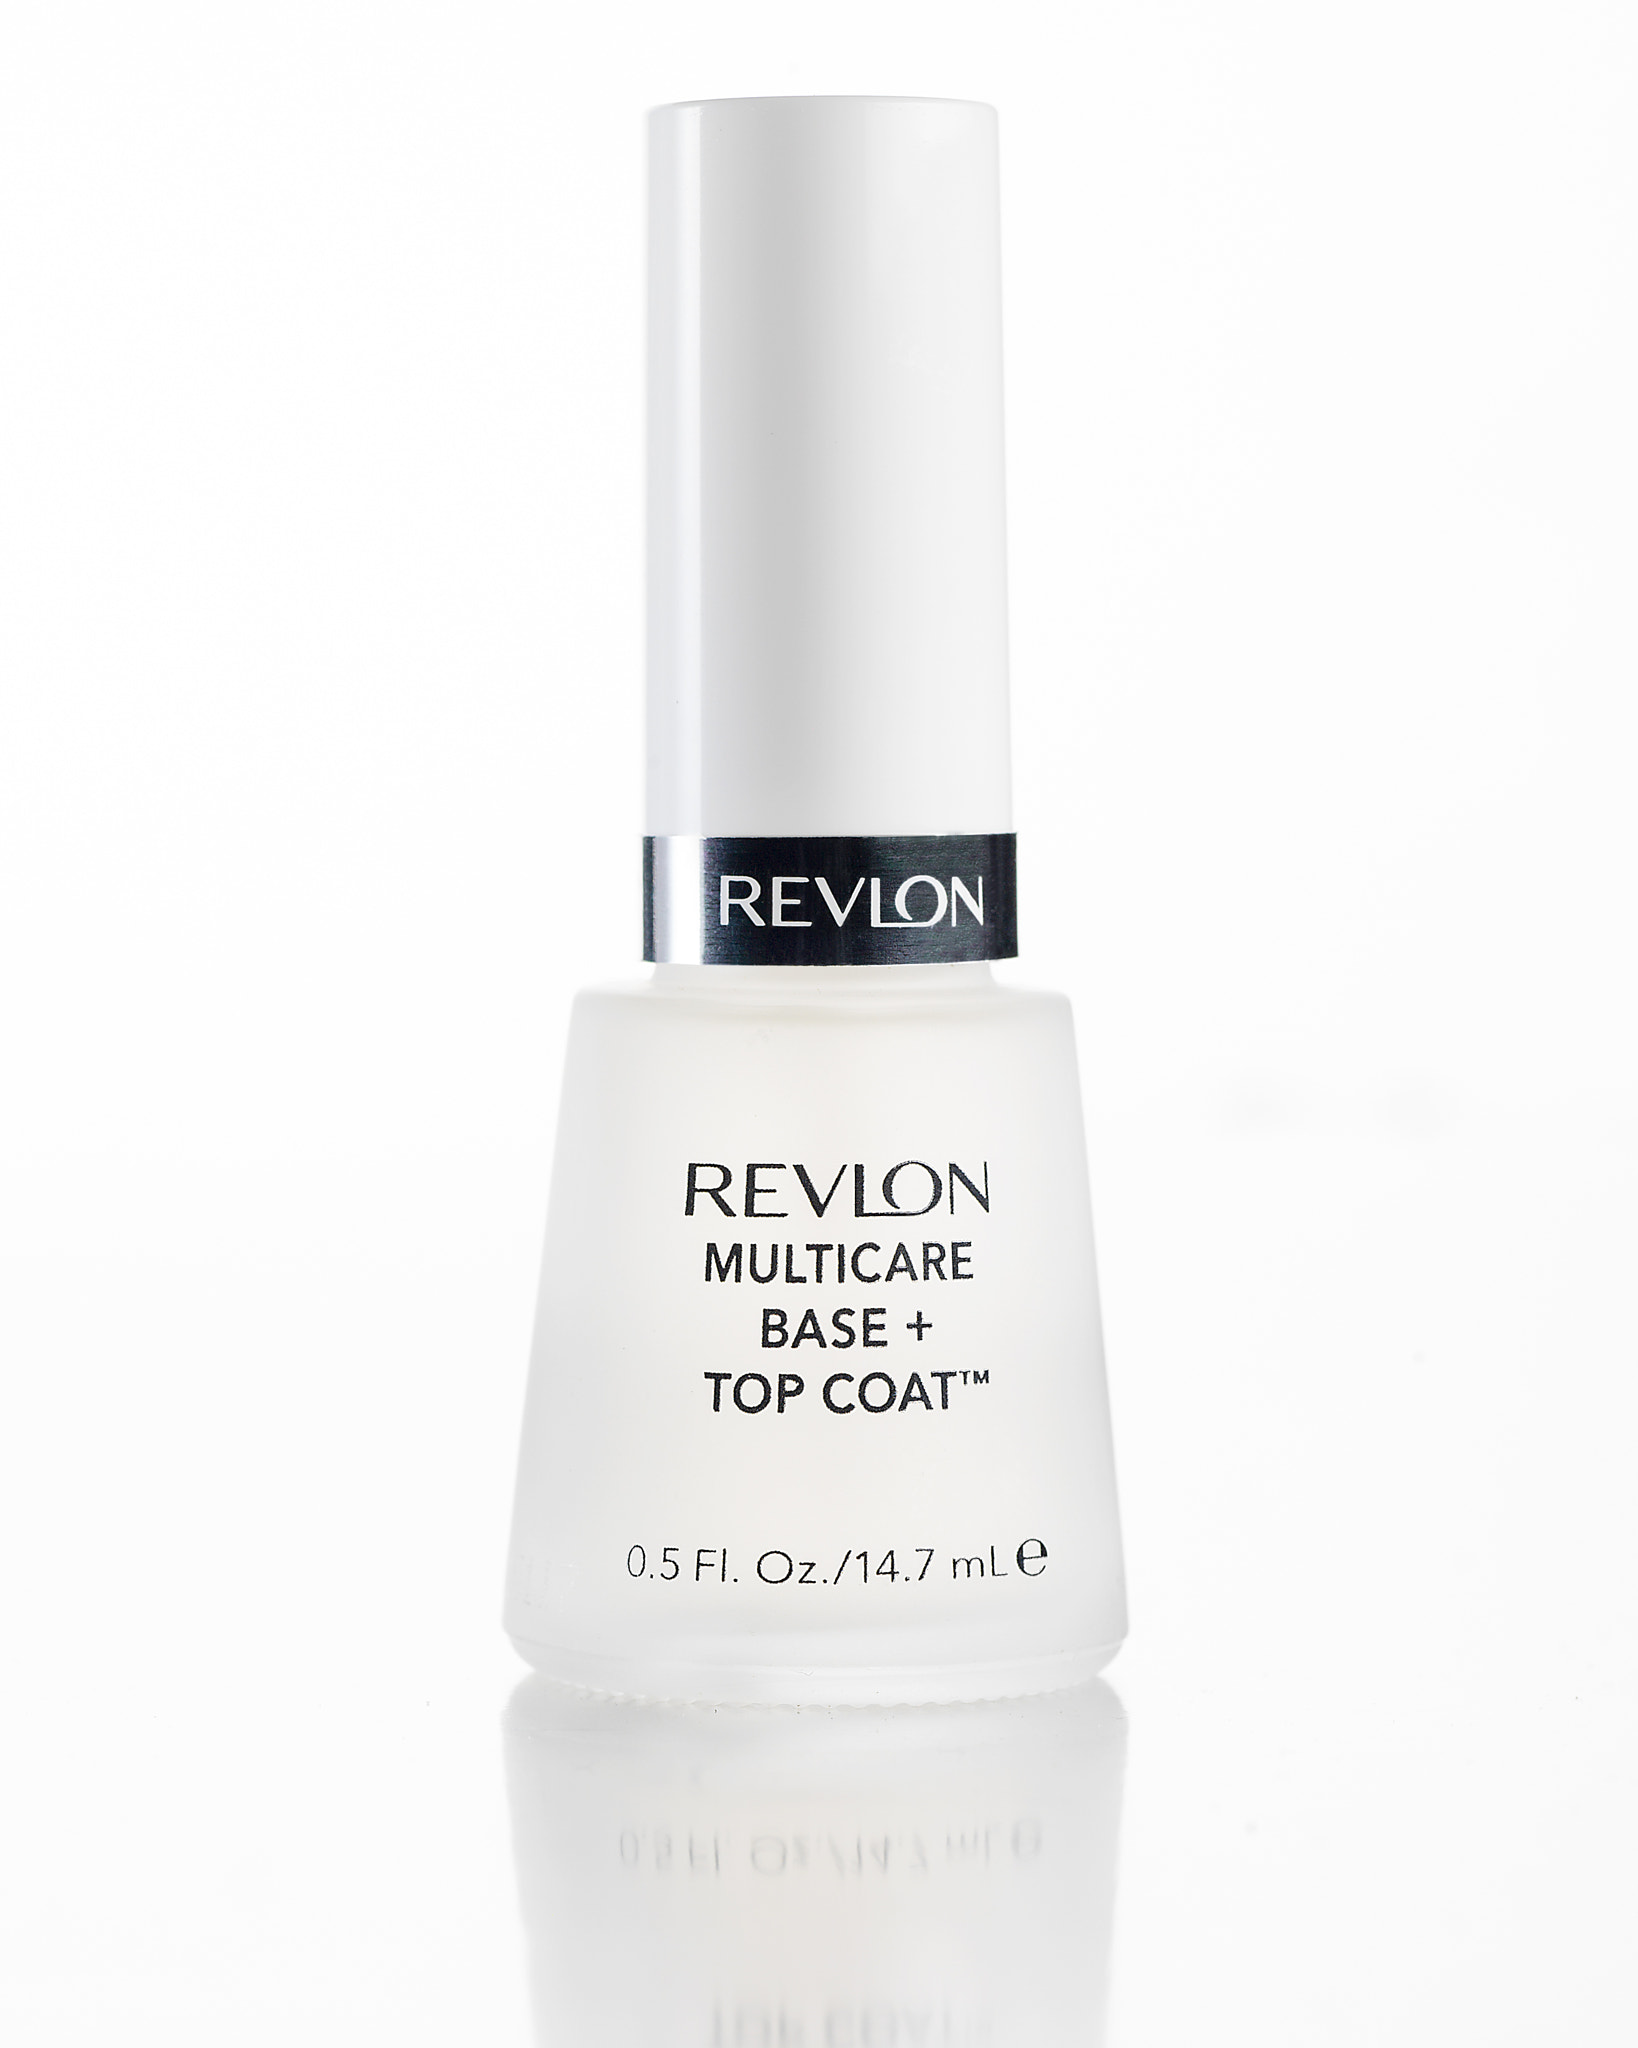 Hasselblad H3DII-39 sample photo. Revlon cosmetic, high key photography